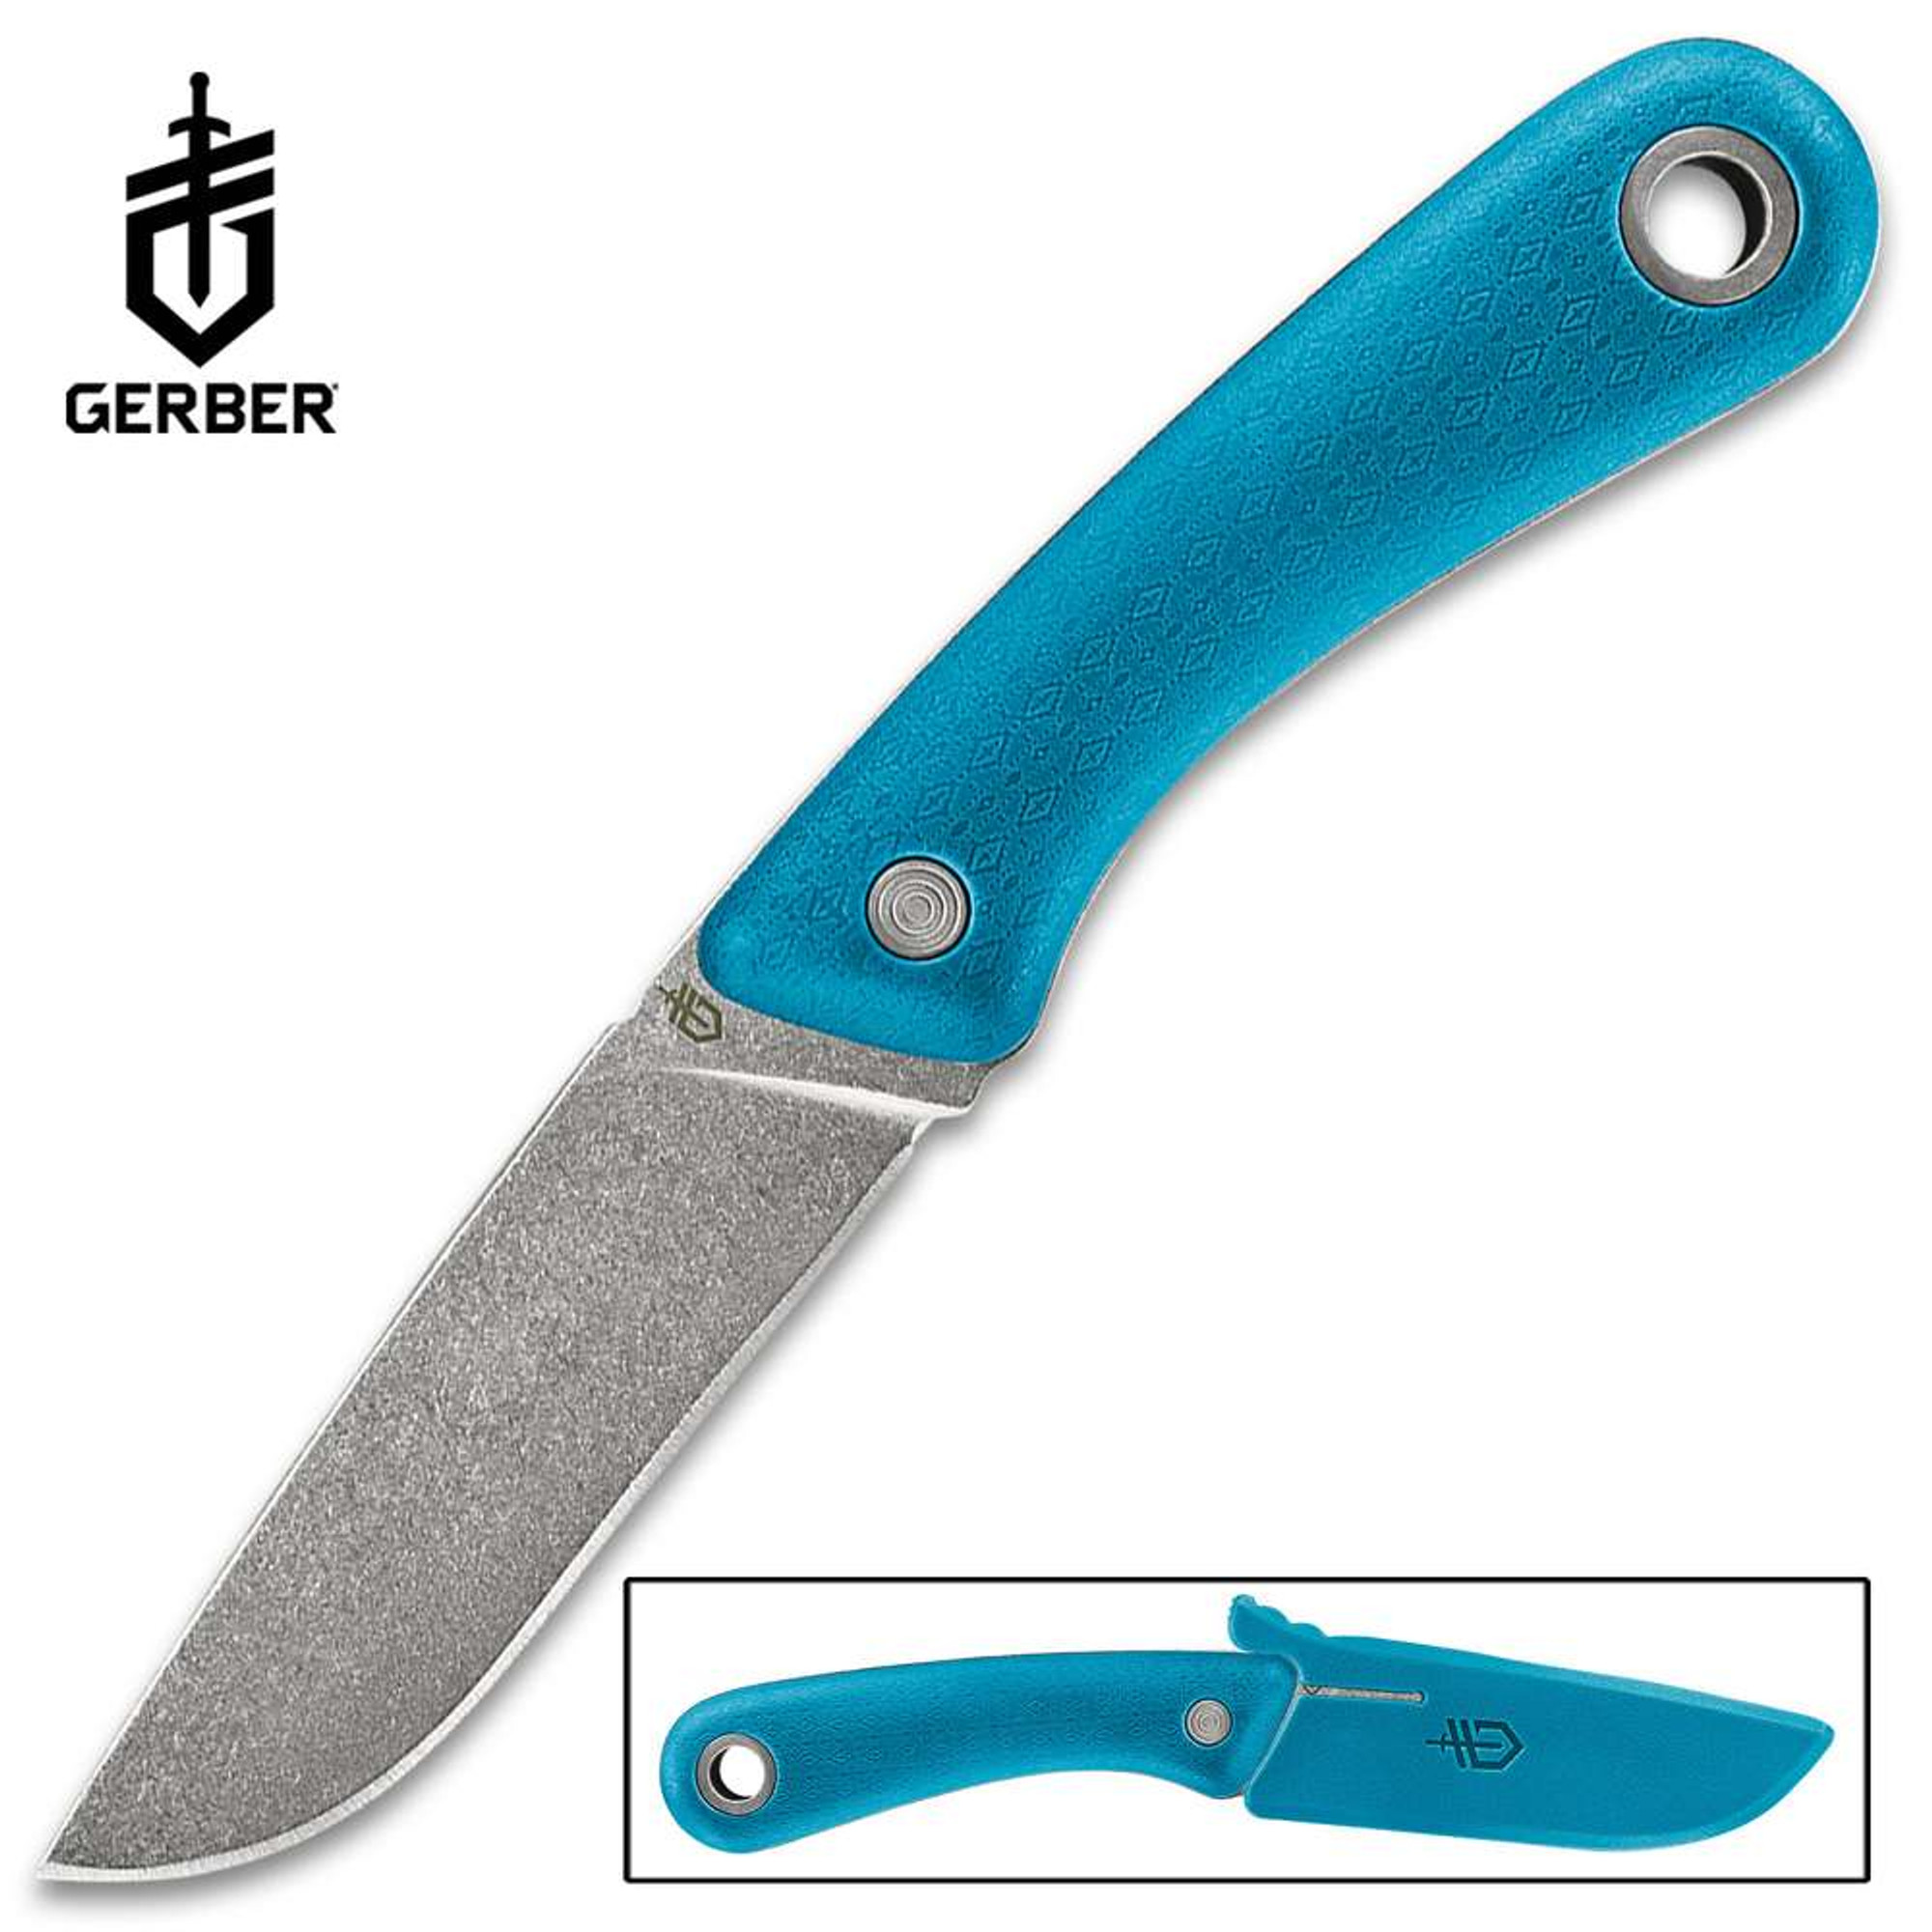 Gerber Cyan Spine Fixed Blade Knife With Sheath